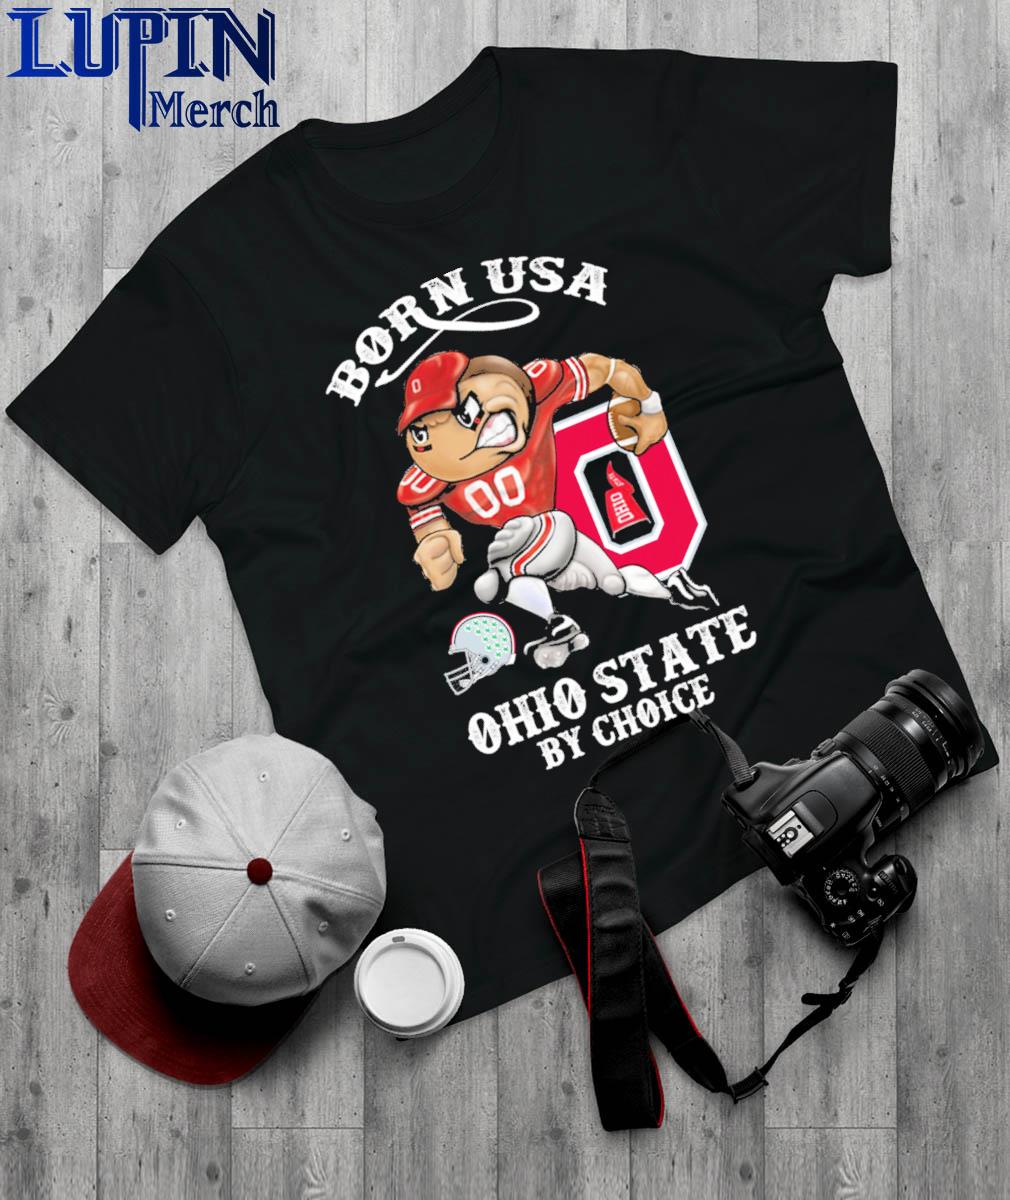 Official Born Usa Ohio State by Choice shirt